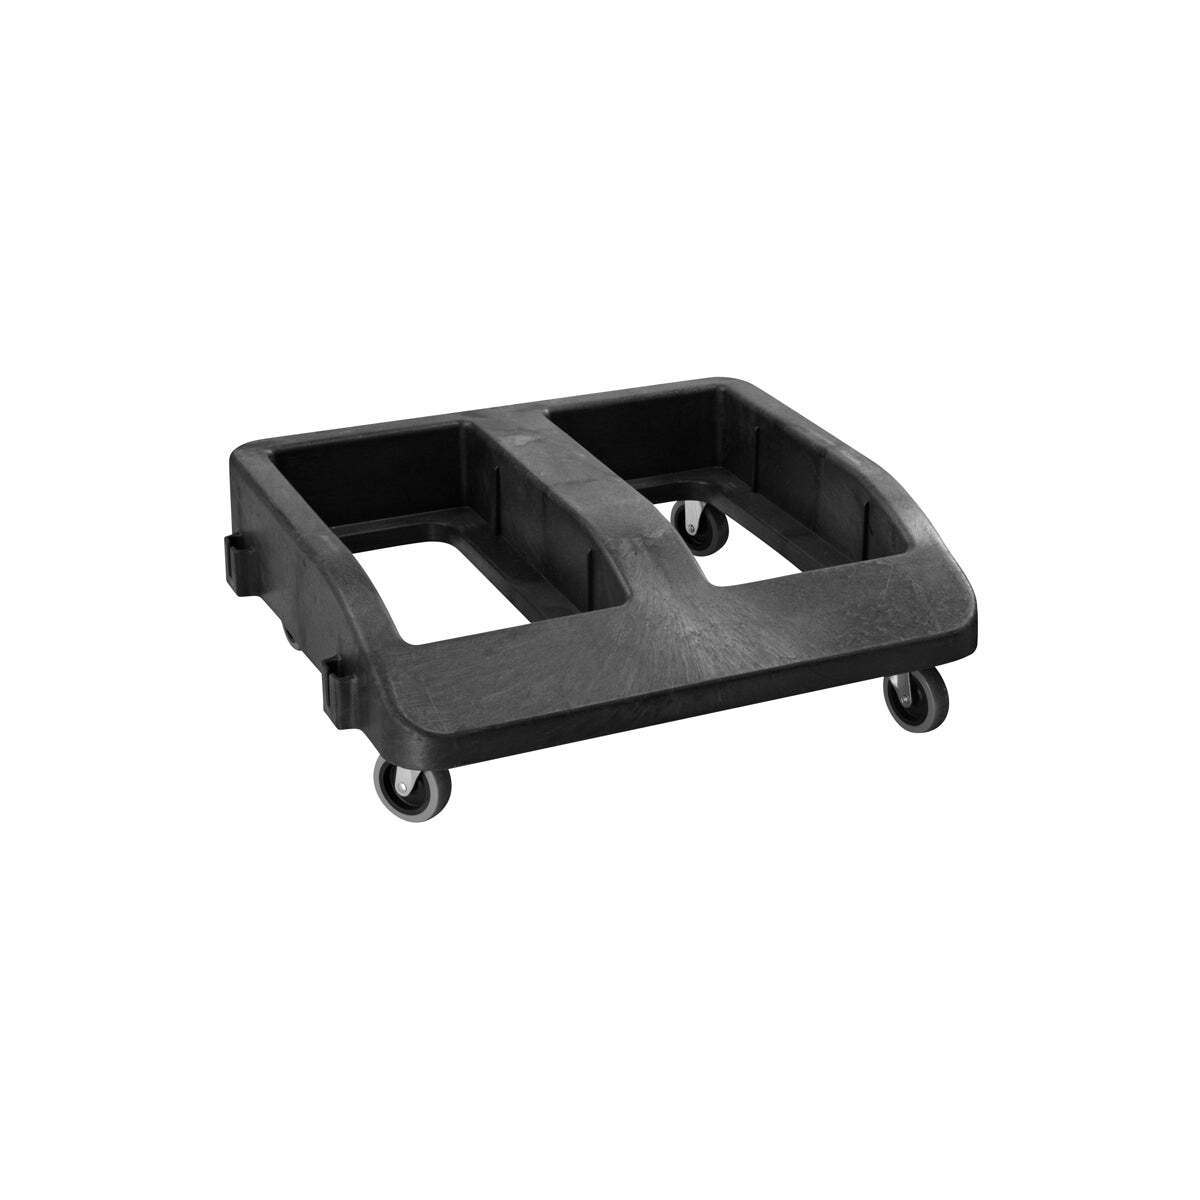 Jiwins Double Compartment Dolly Cr76S Black PP 580x610x195mm